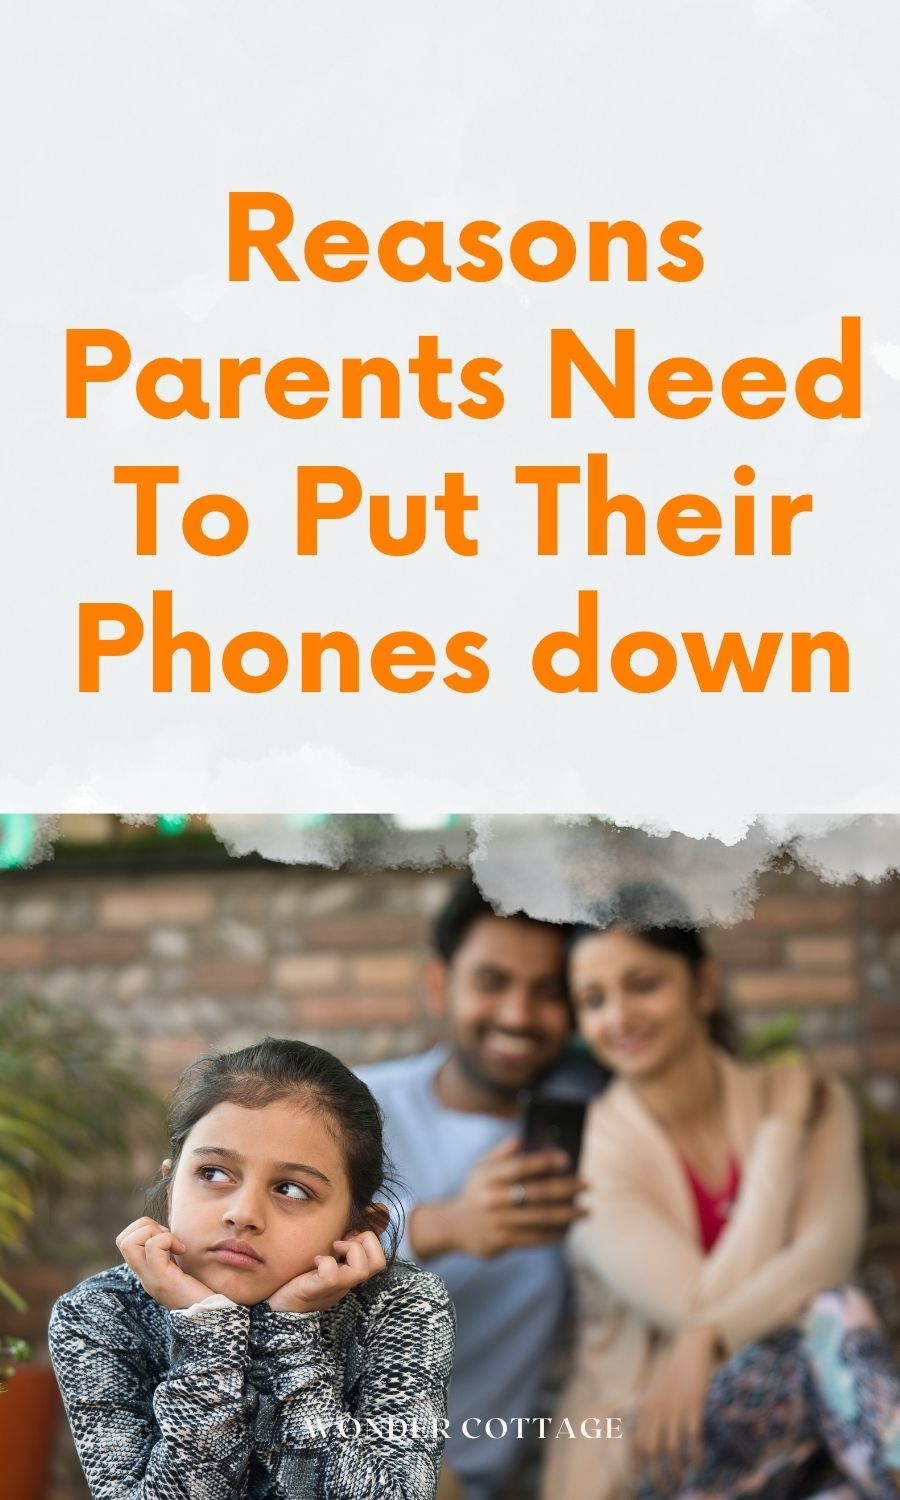 Reasons parents need to put their phones down